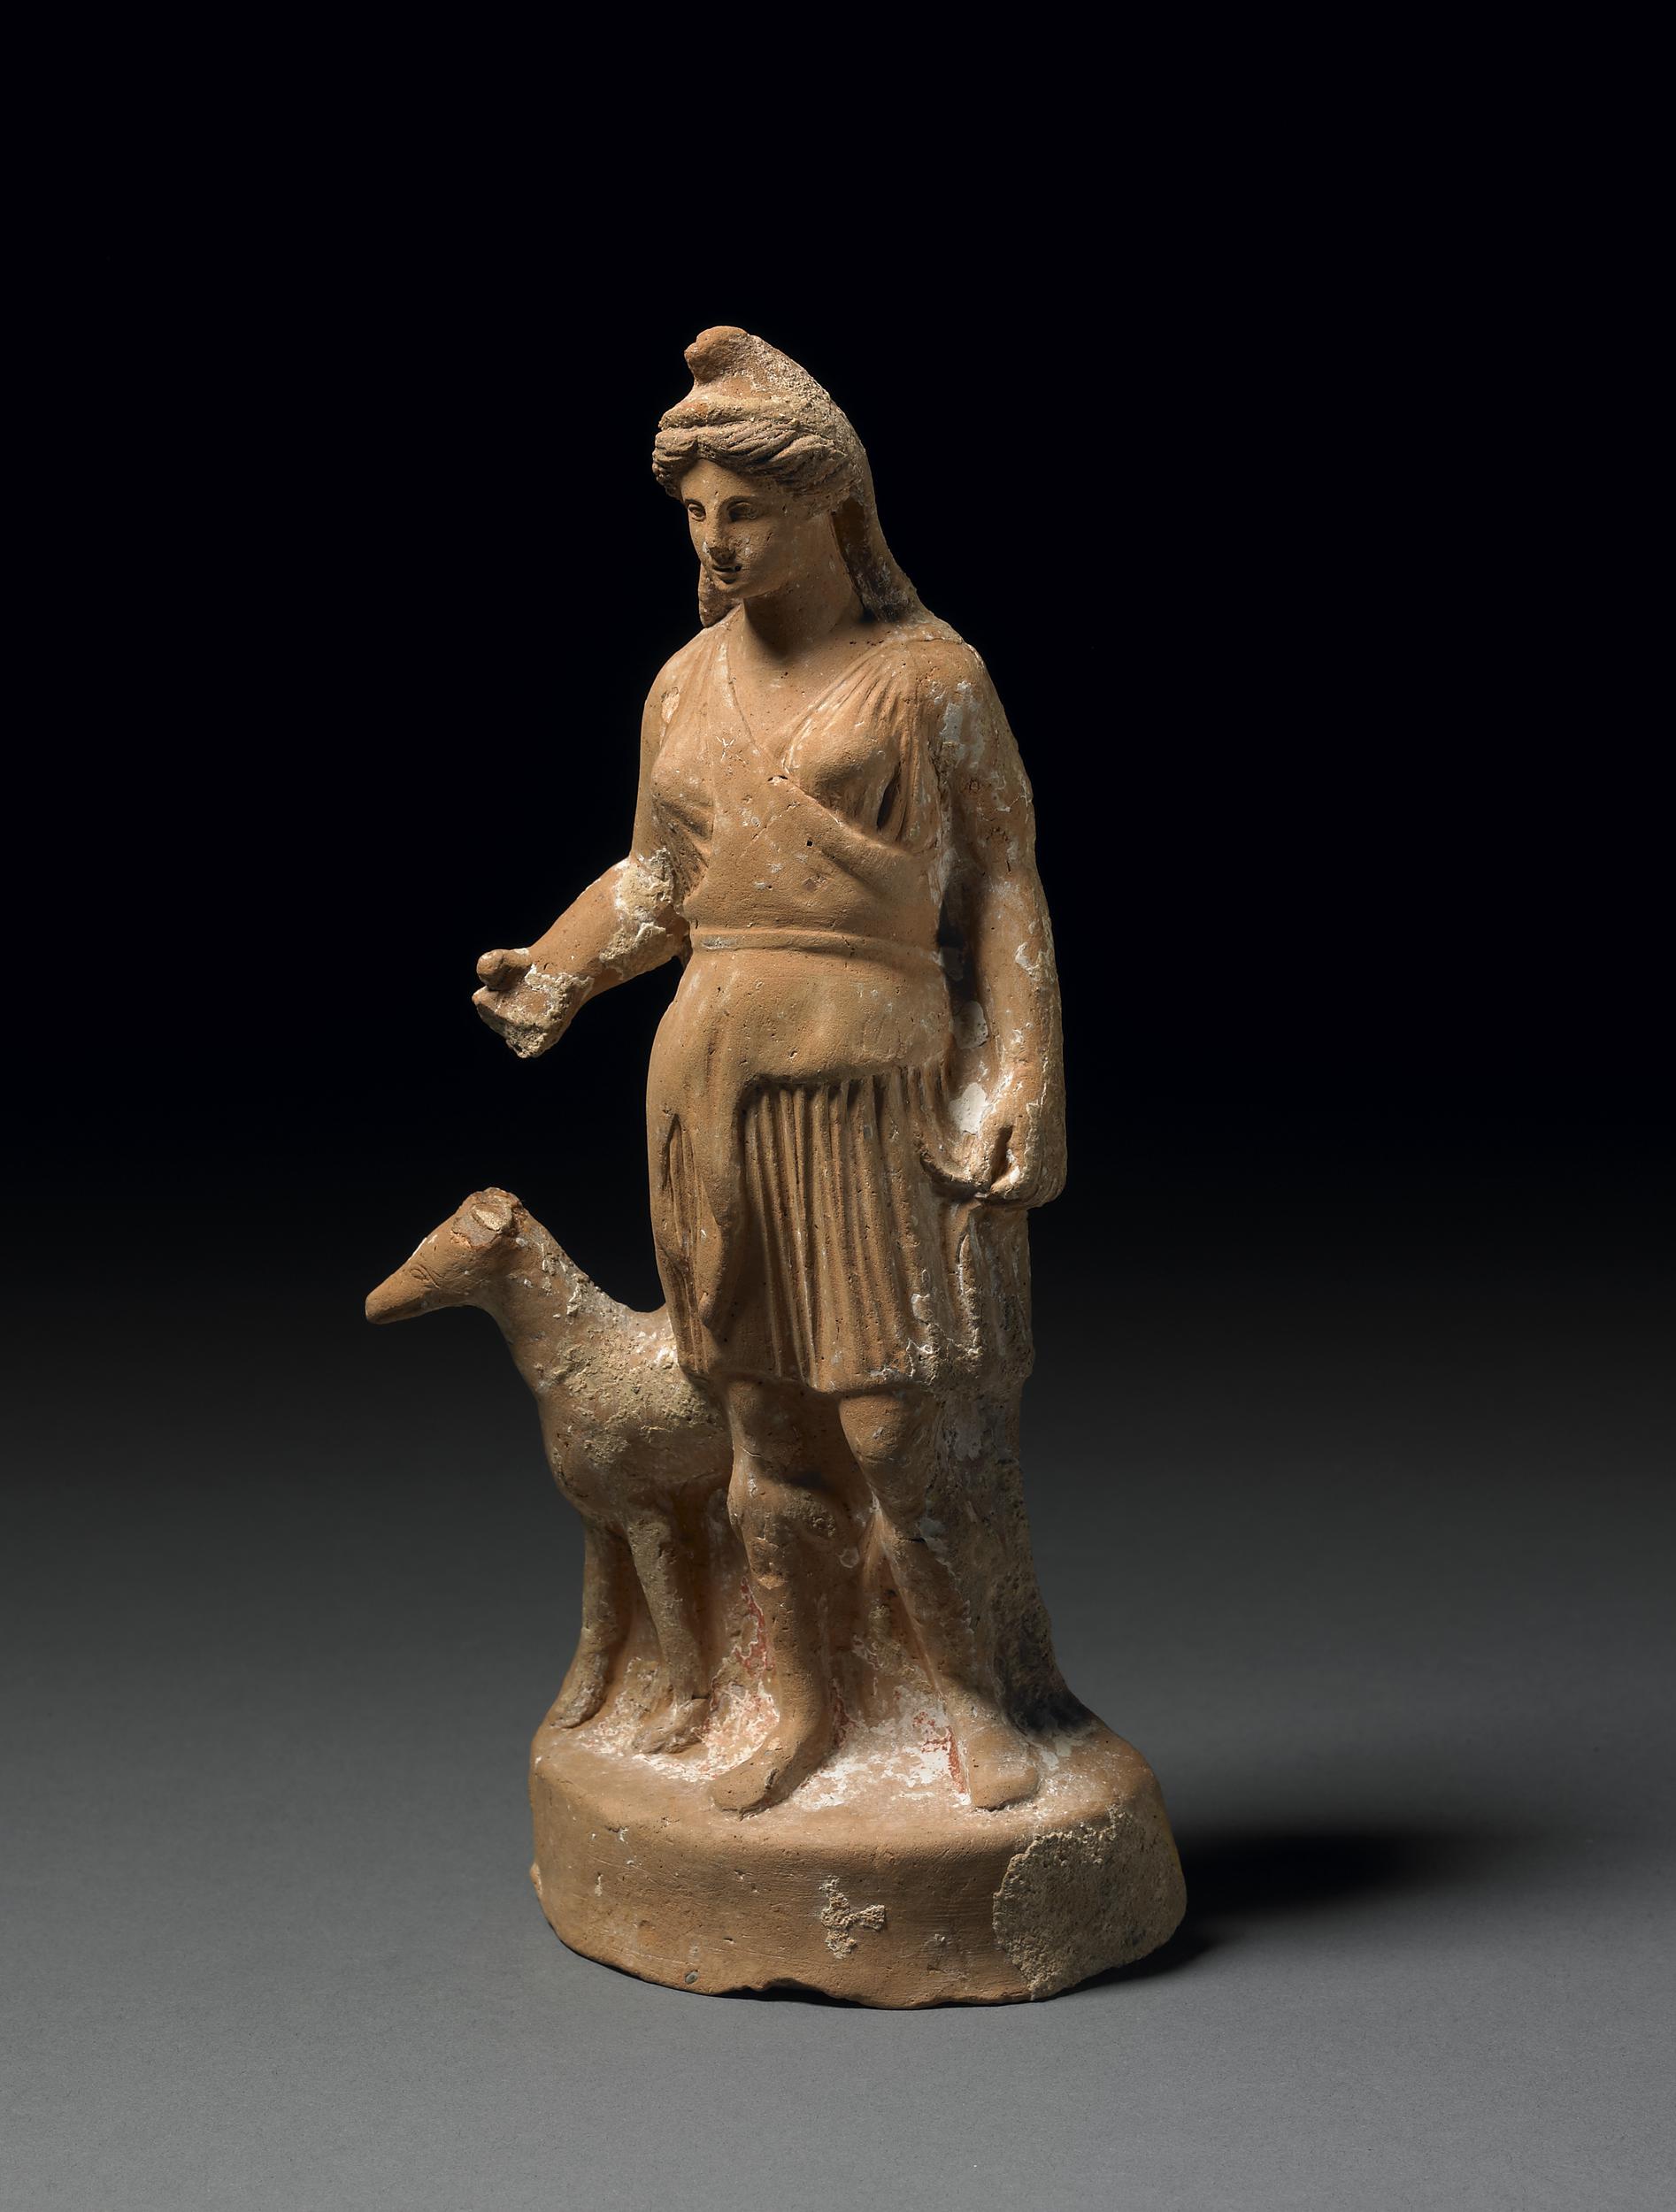 Artemis standing with a deer. She is a young robed woman and wears a conical Phrygian cap.